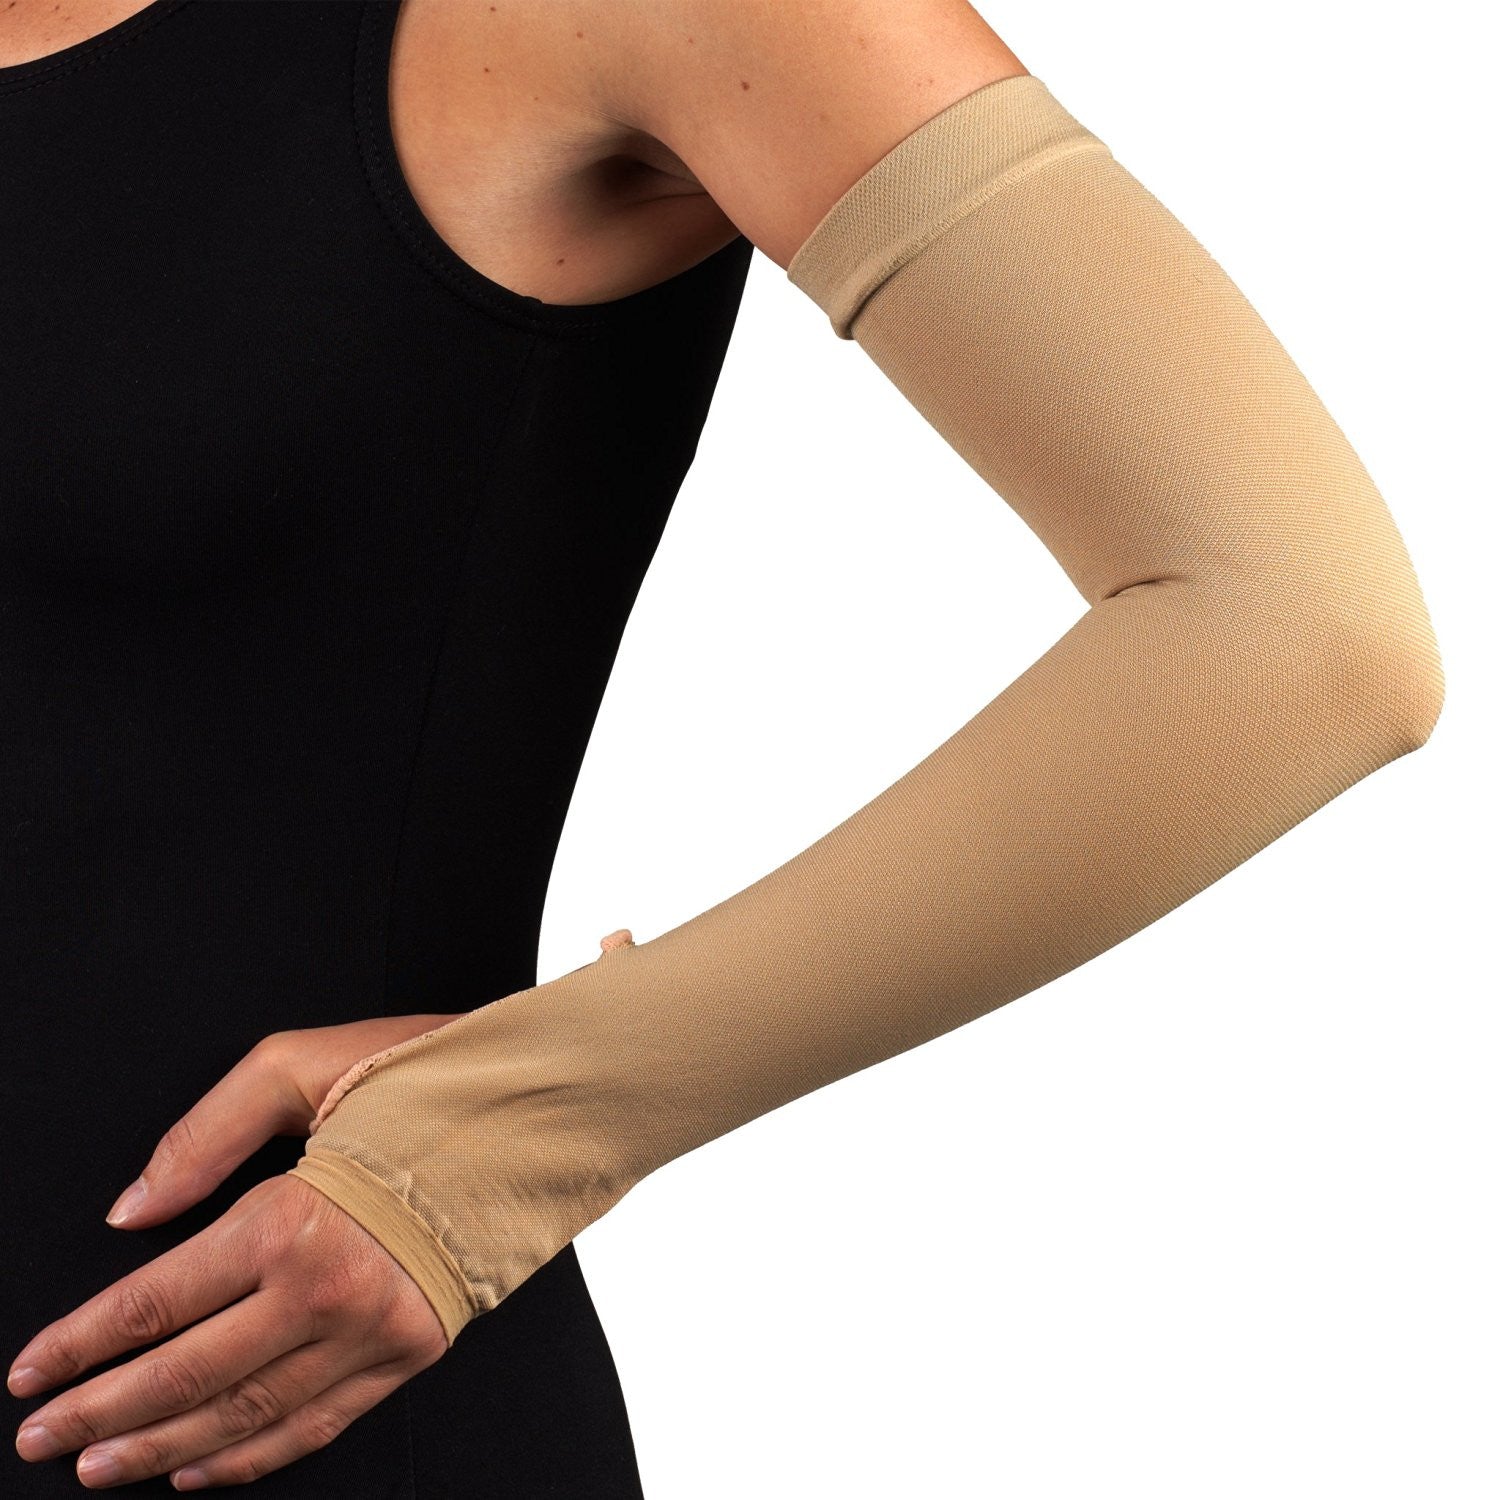 Compression Arm Sleeve with Gauntlet, Lymphedema Post-Op Support